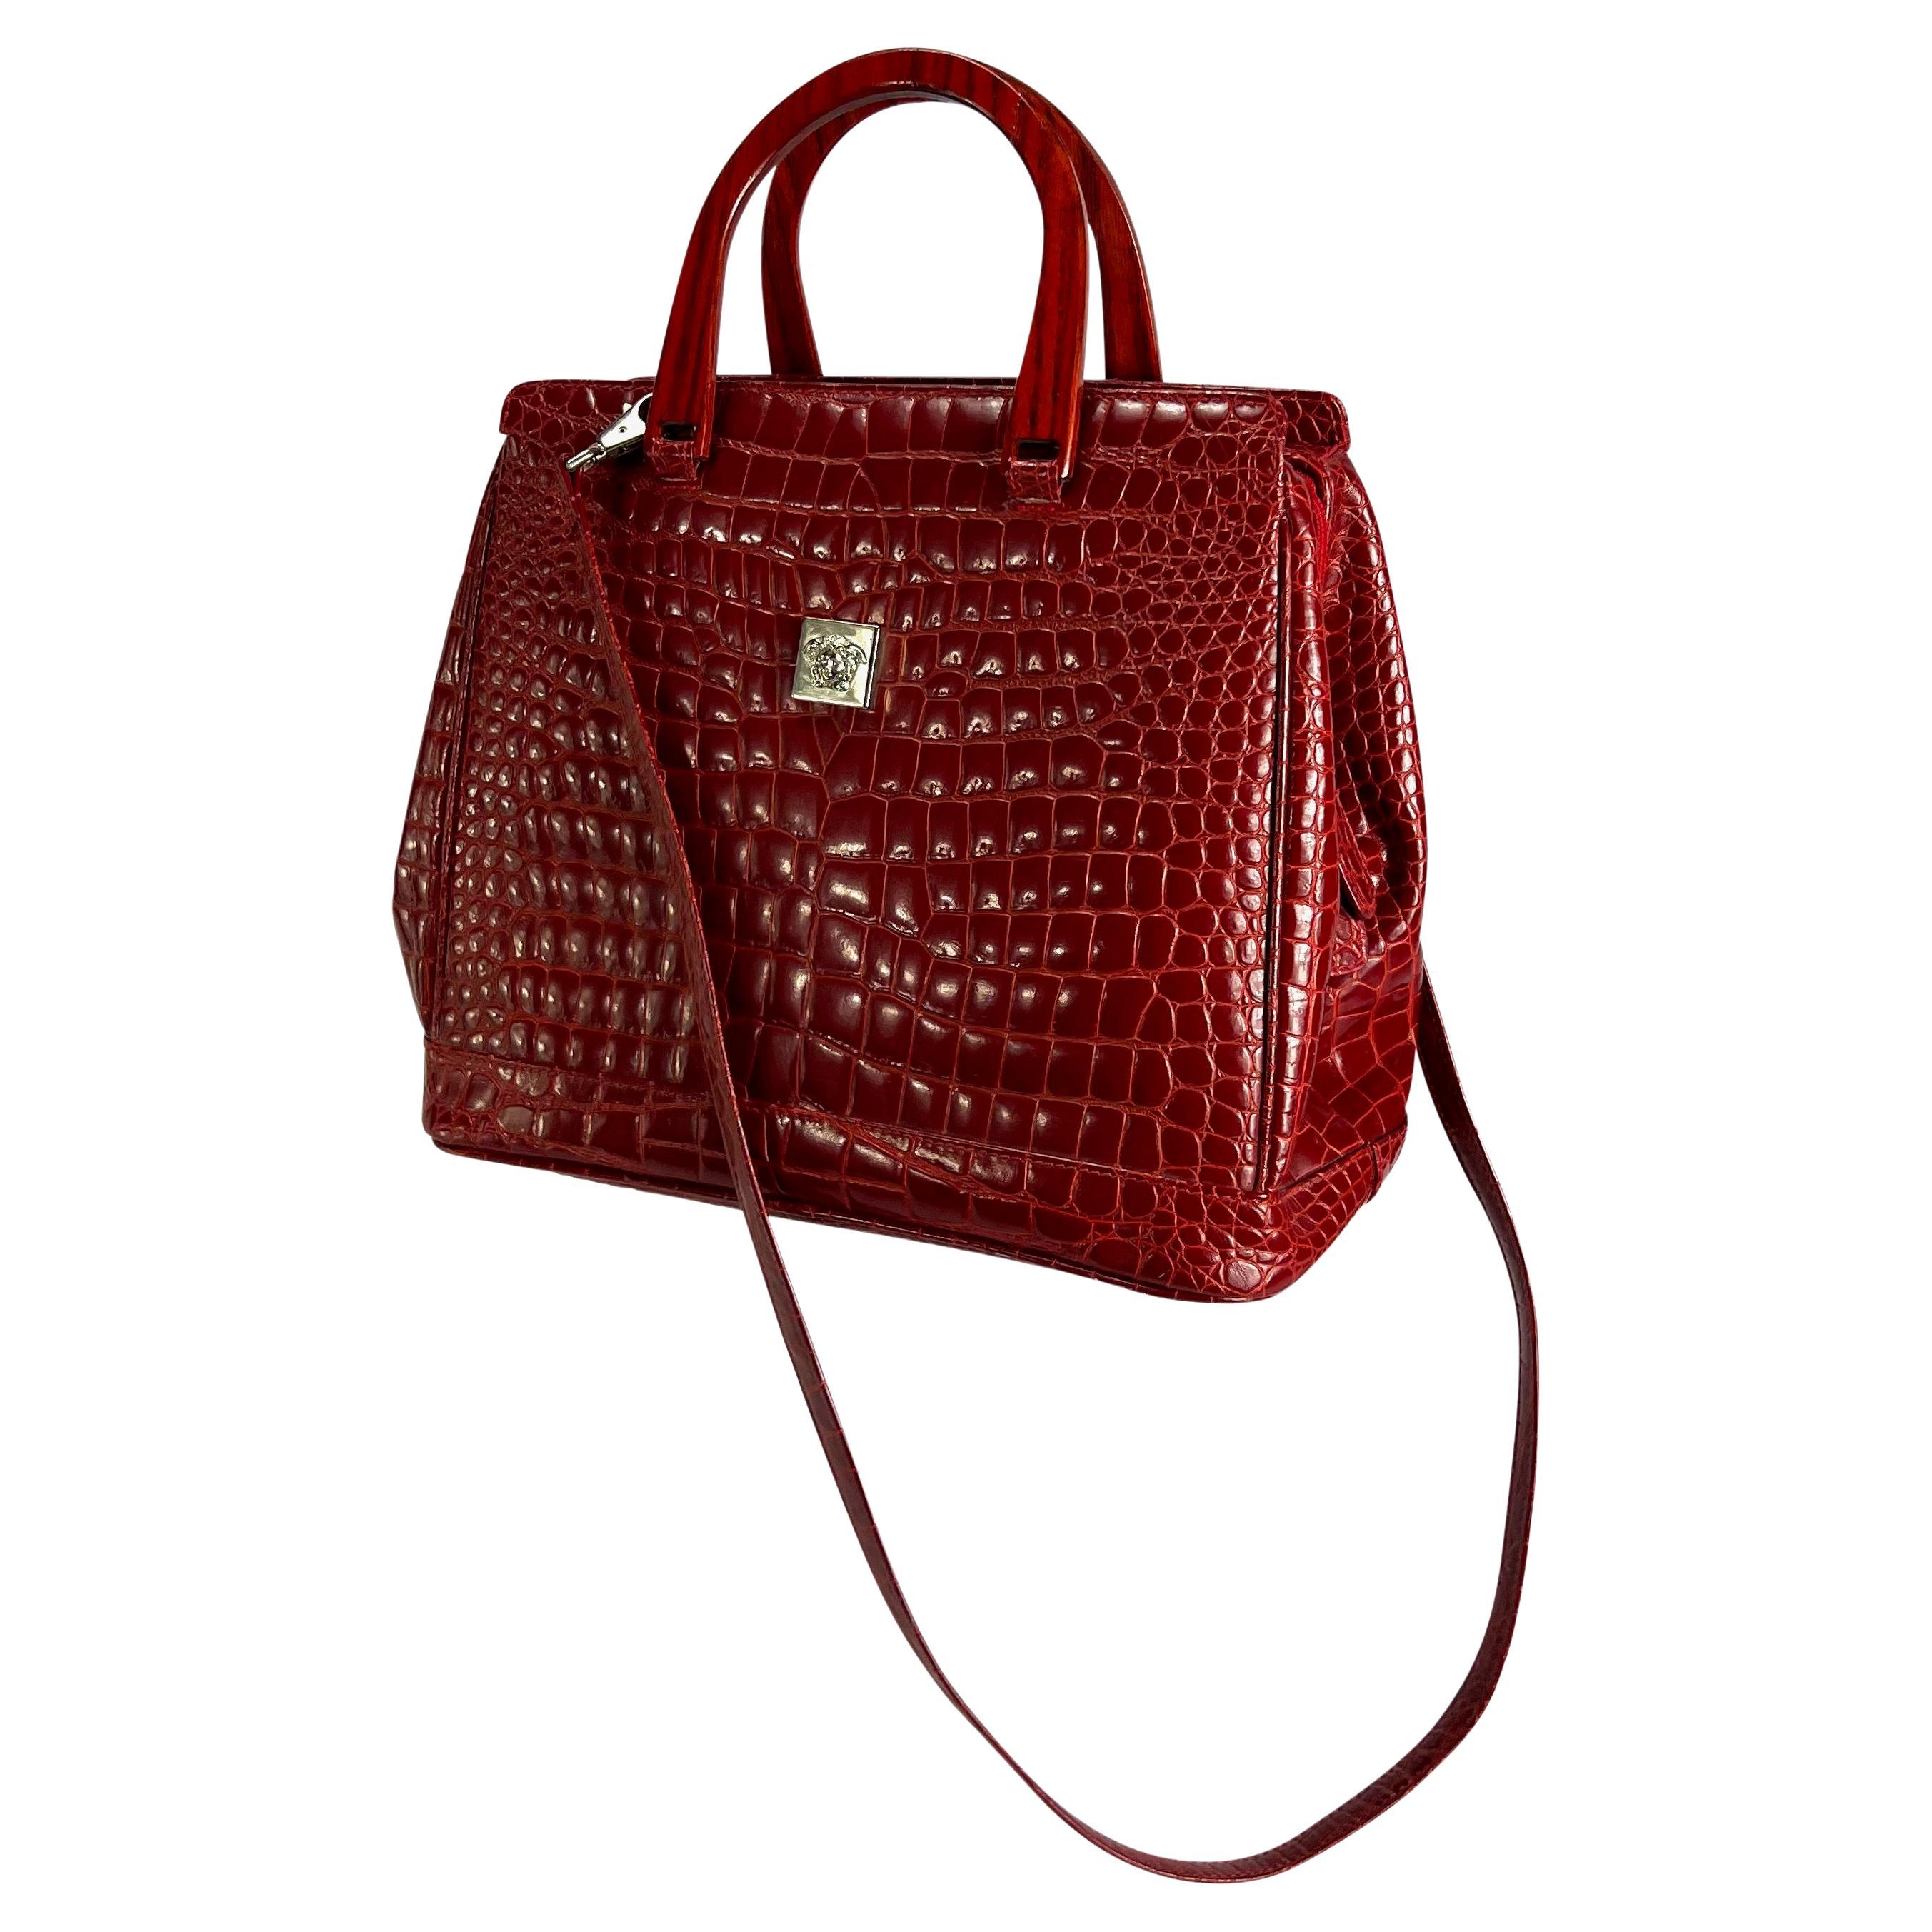 Presenting a fabulous bright red crocodile embossed top handle bag, designed by Gianni Versace. This bag features red wooden top handles, a removable longer crossbody strap, and is made complete with a silver-tone Medusa Versace plaque on the front.